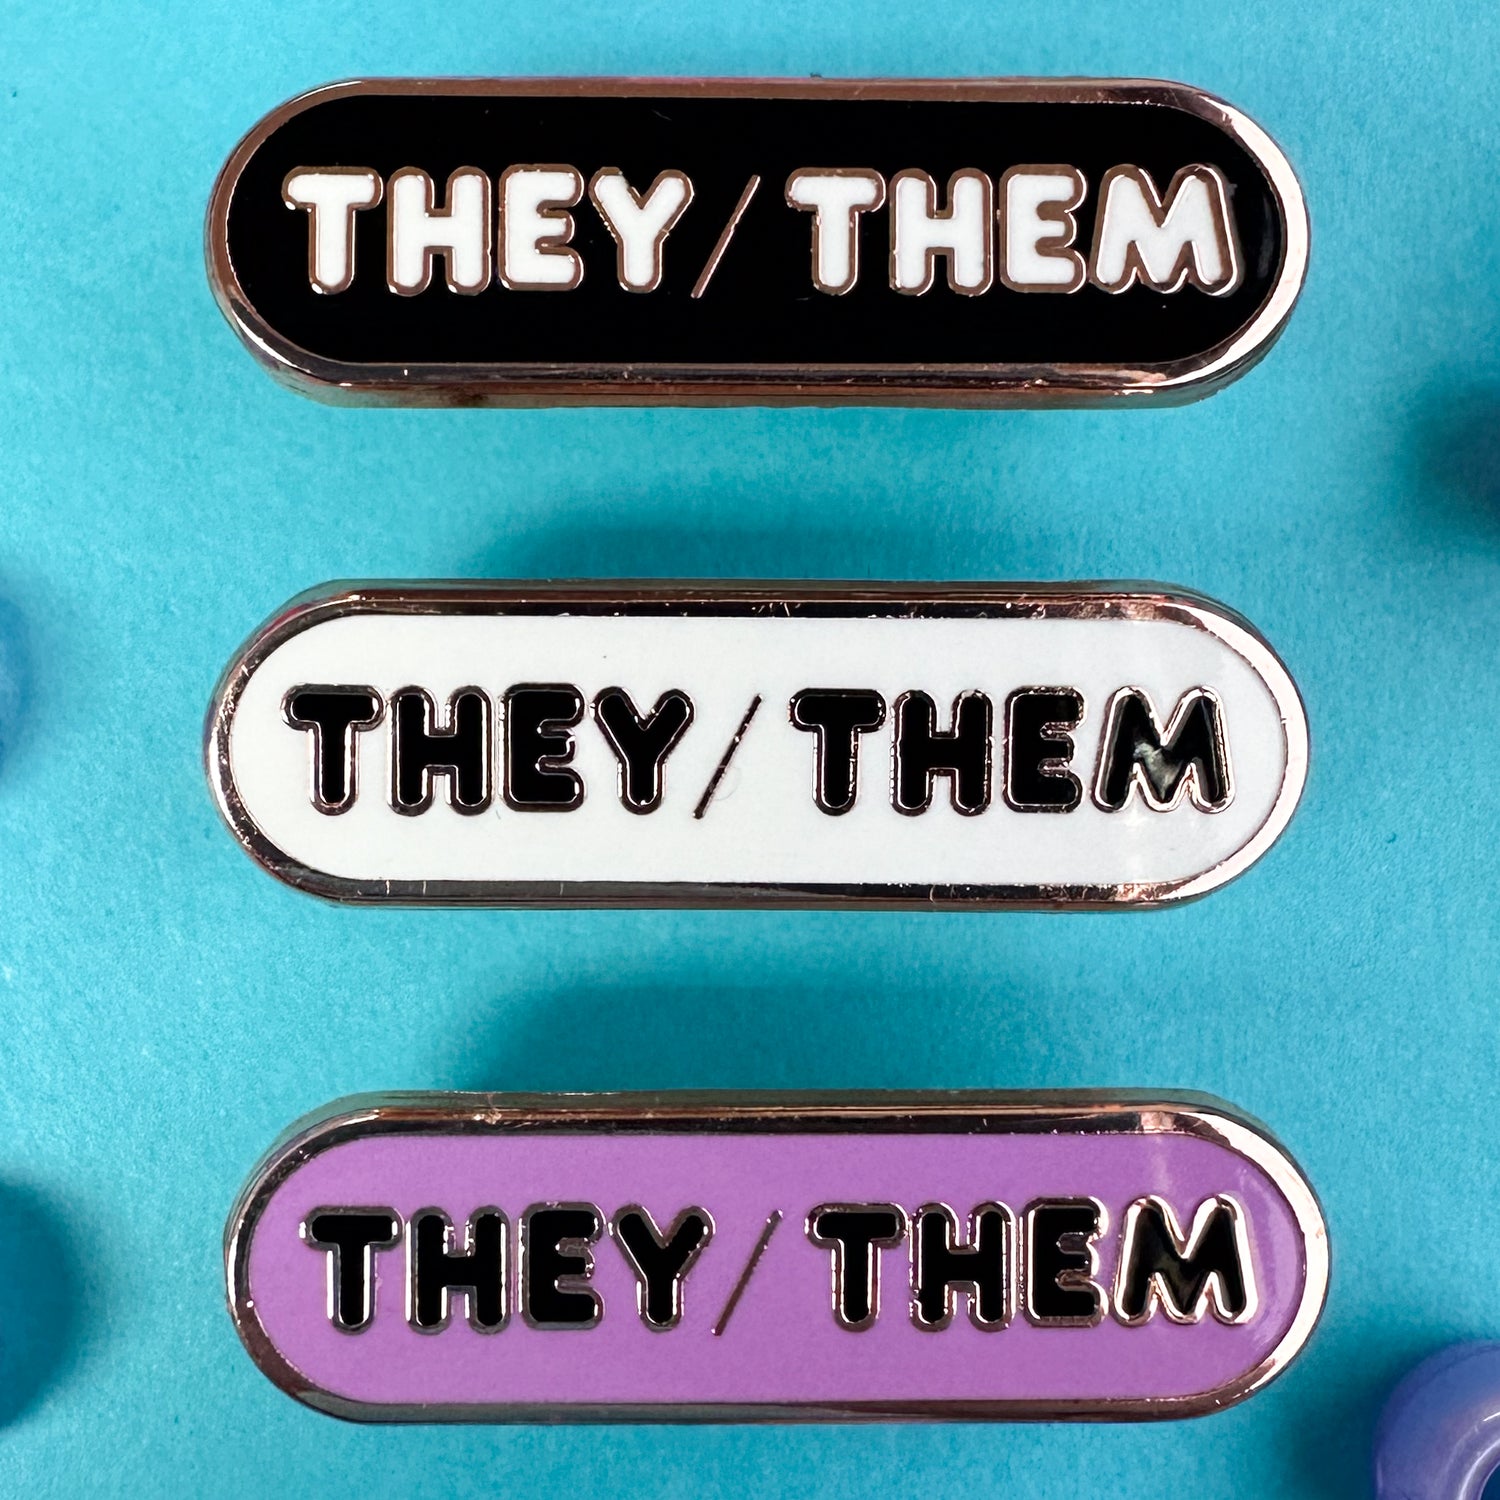 Three pins with the pronouns "They/Them" written on them, one pins is black, one is white, and one is lavender. The pins are on a blue background with blue pony beads around it. 